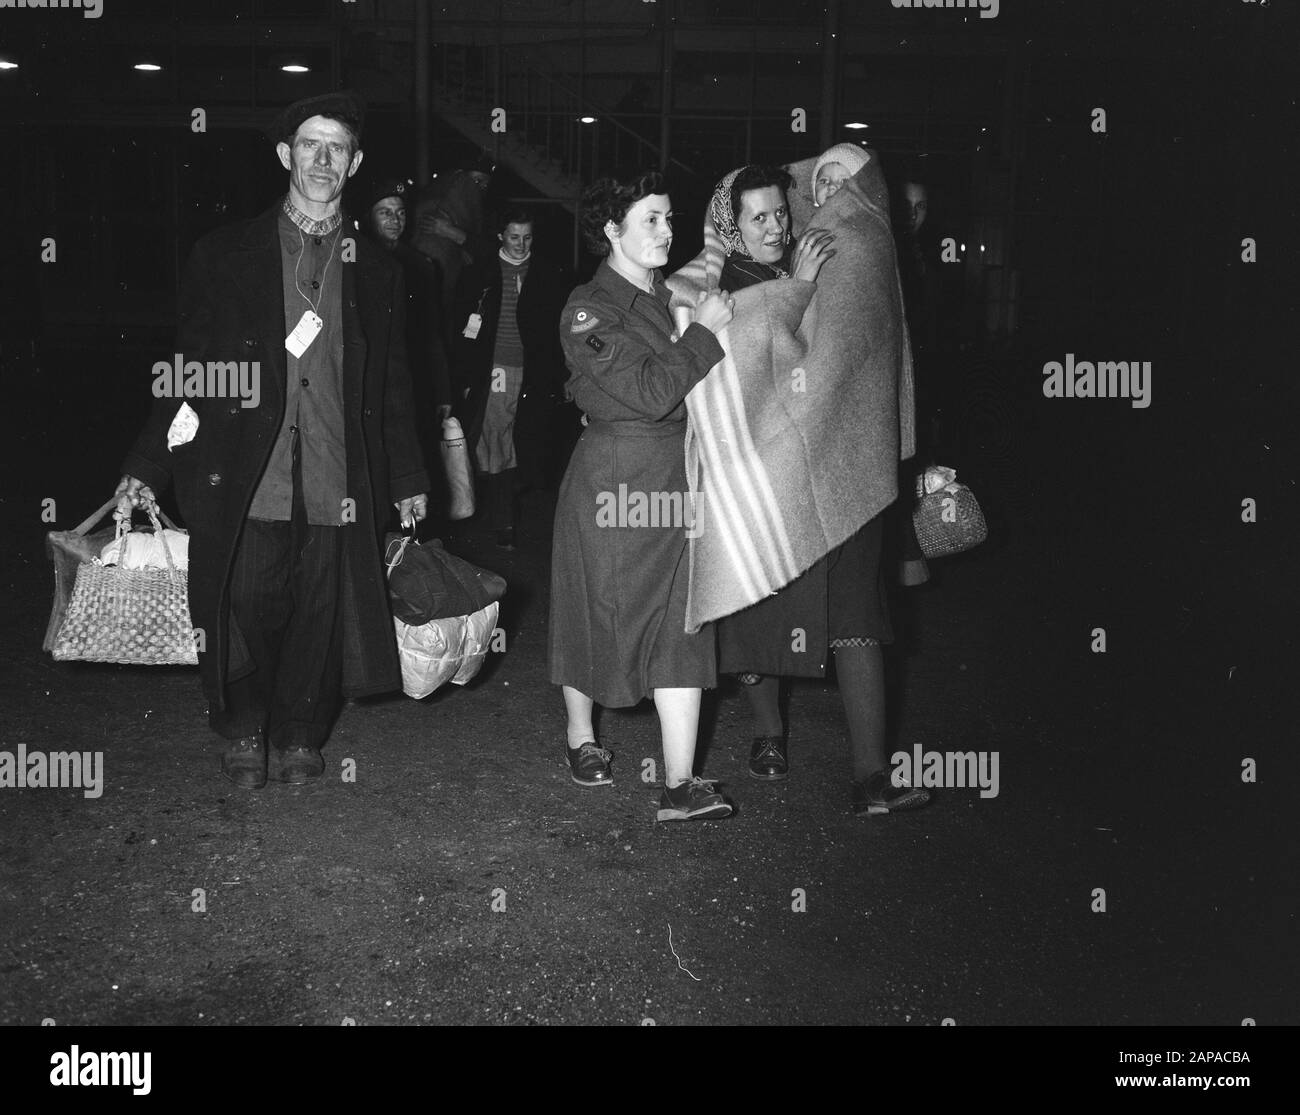 Arrival third group of Hungarian refugees Date: November 25, 1956 Keywords: ARRIVATE, REFIENCY Stock Photo